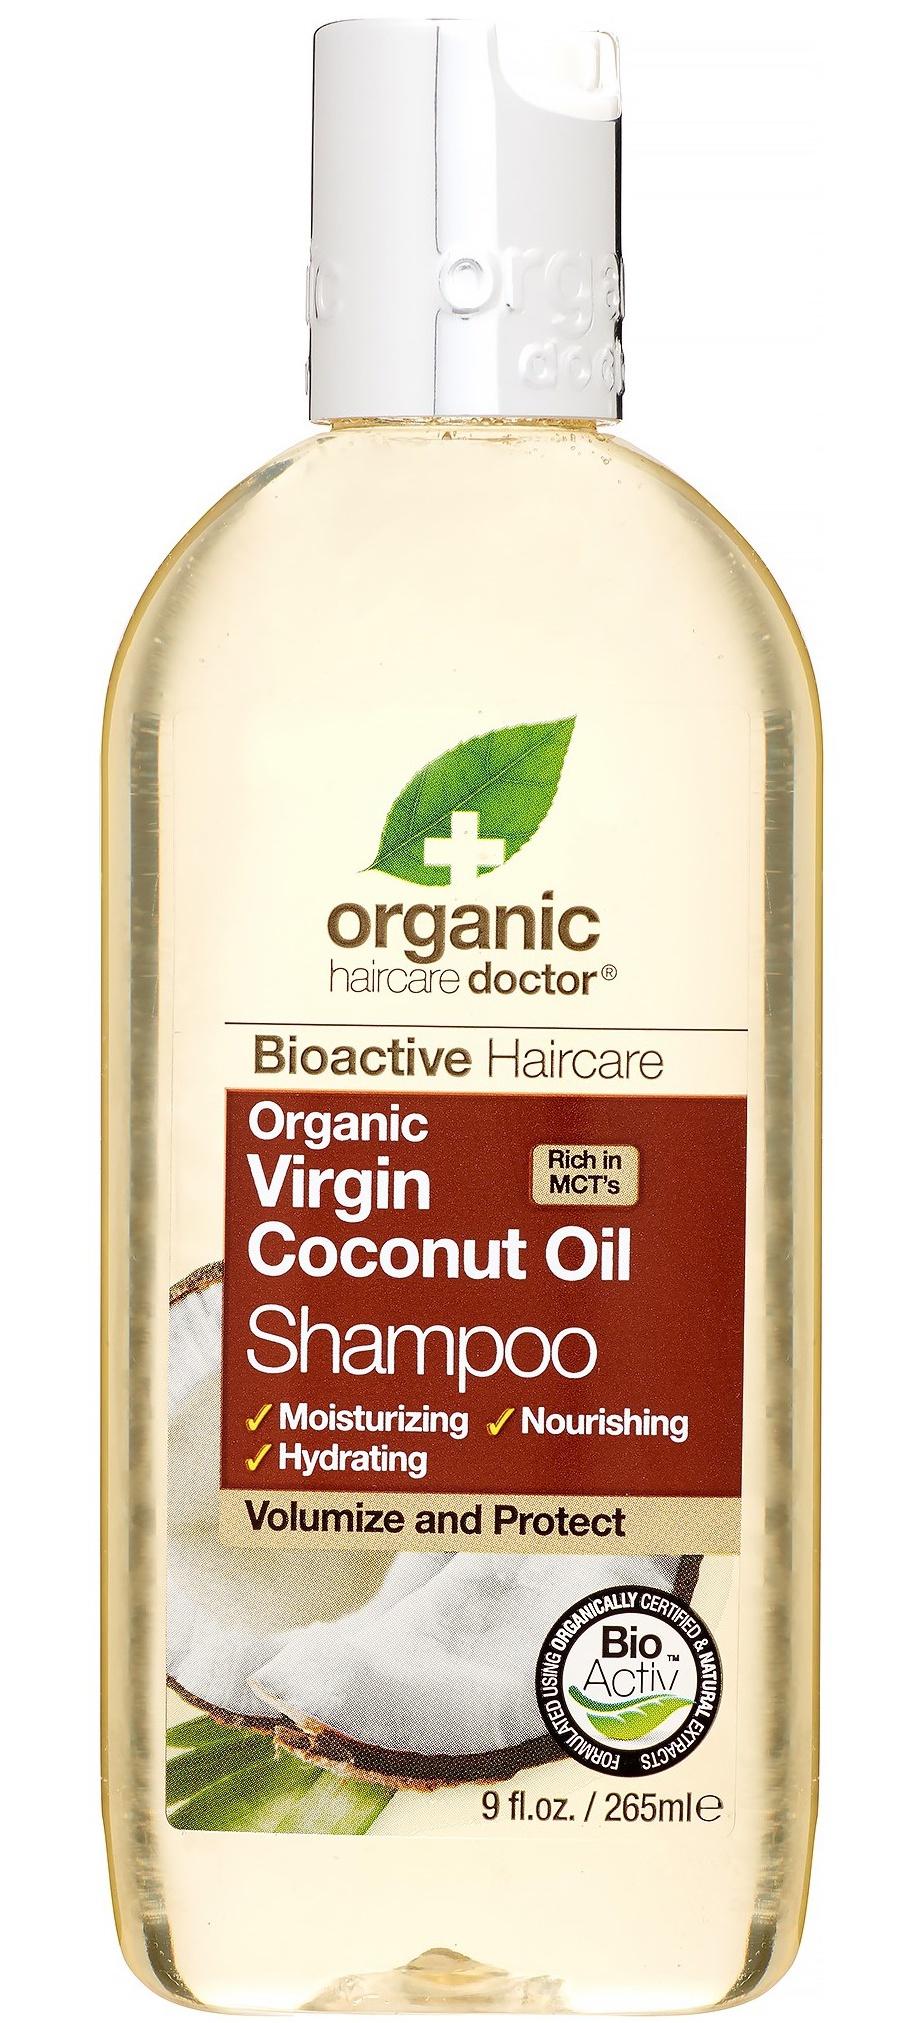 Dr Organic Virgin Coconut Oil Shampoo ingredients (Explained)